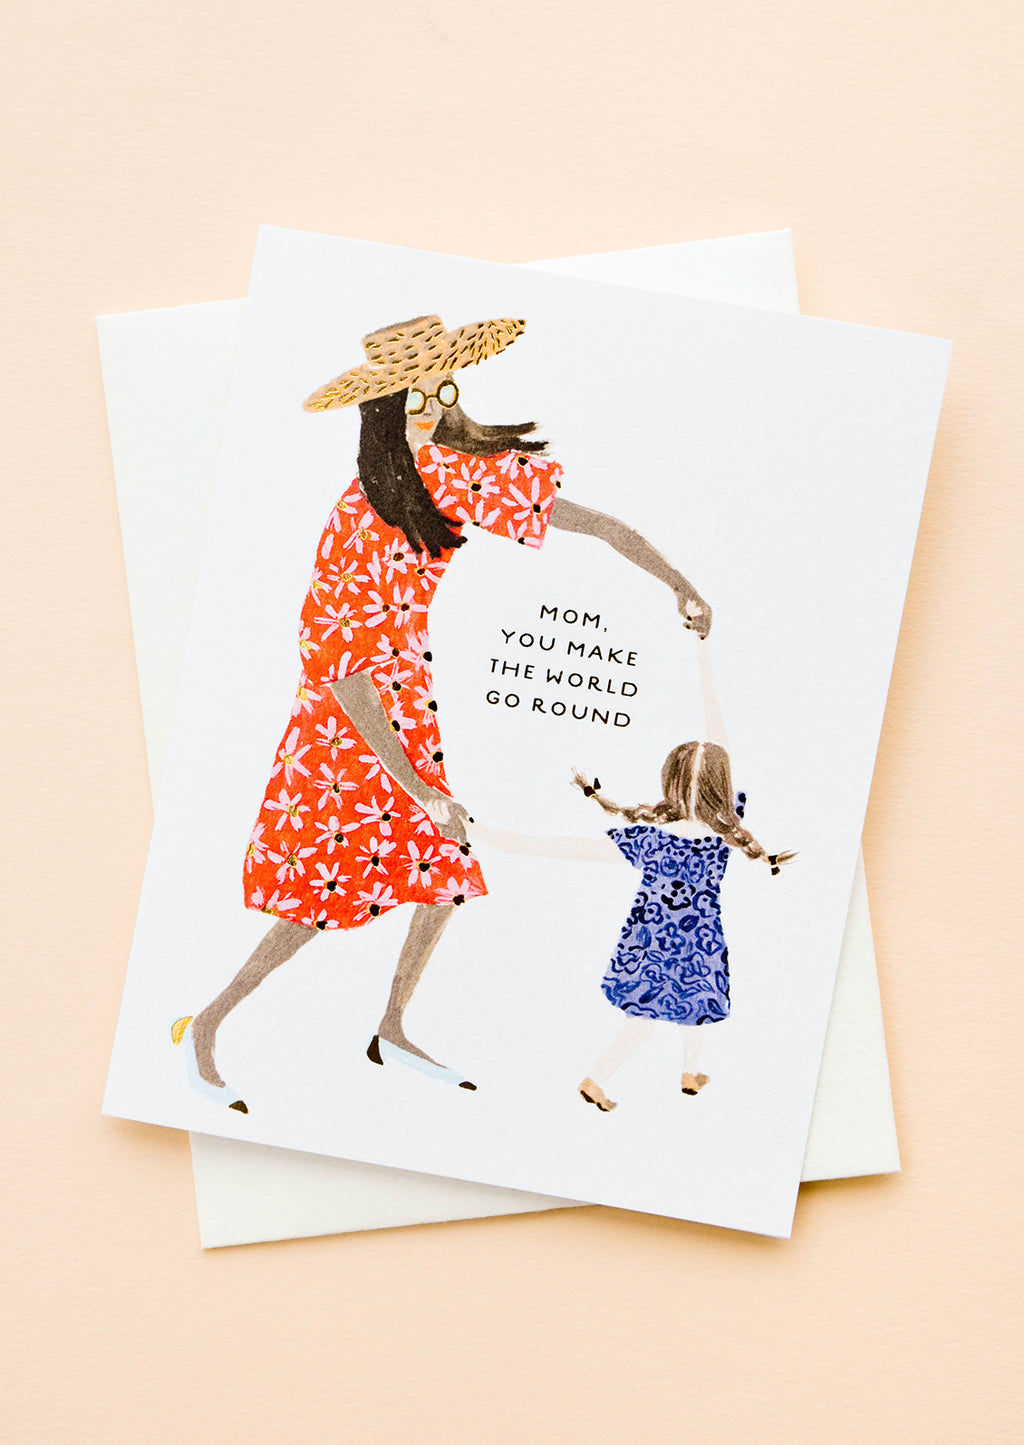 1: Greeting card picturing illustration of mother and child, text reading "Mom, You Make The World Go Round"